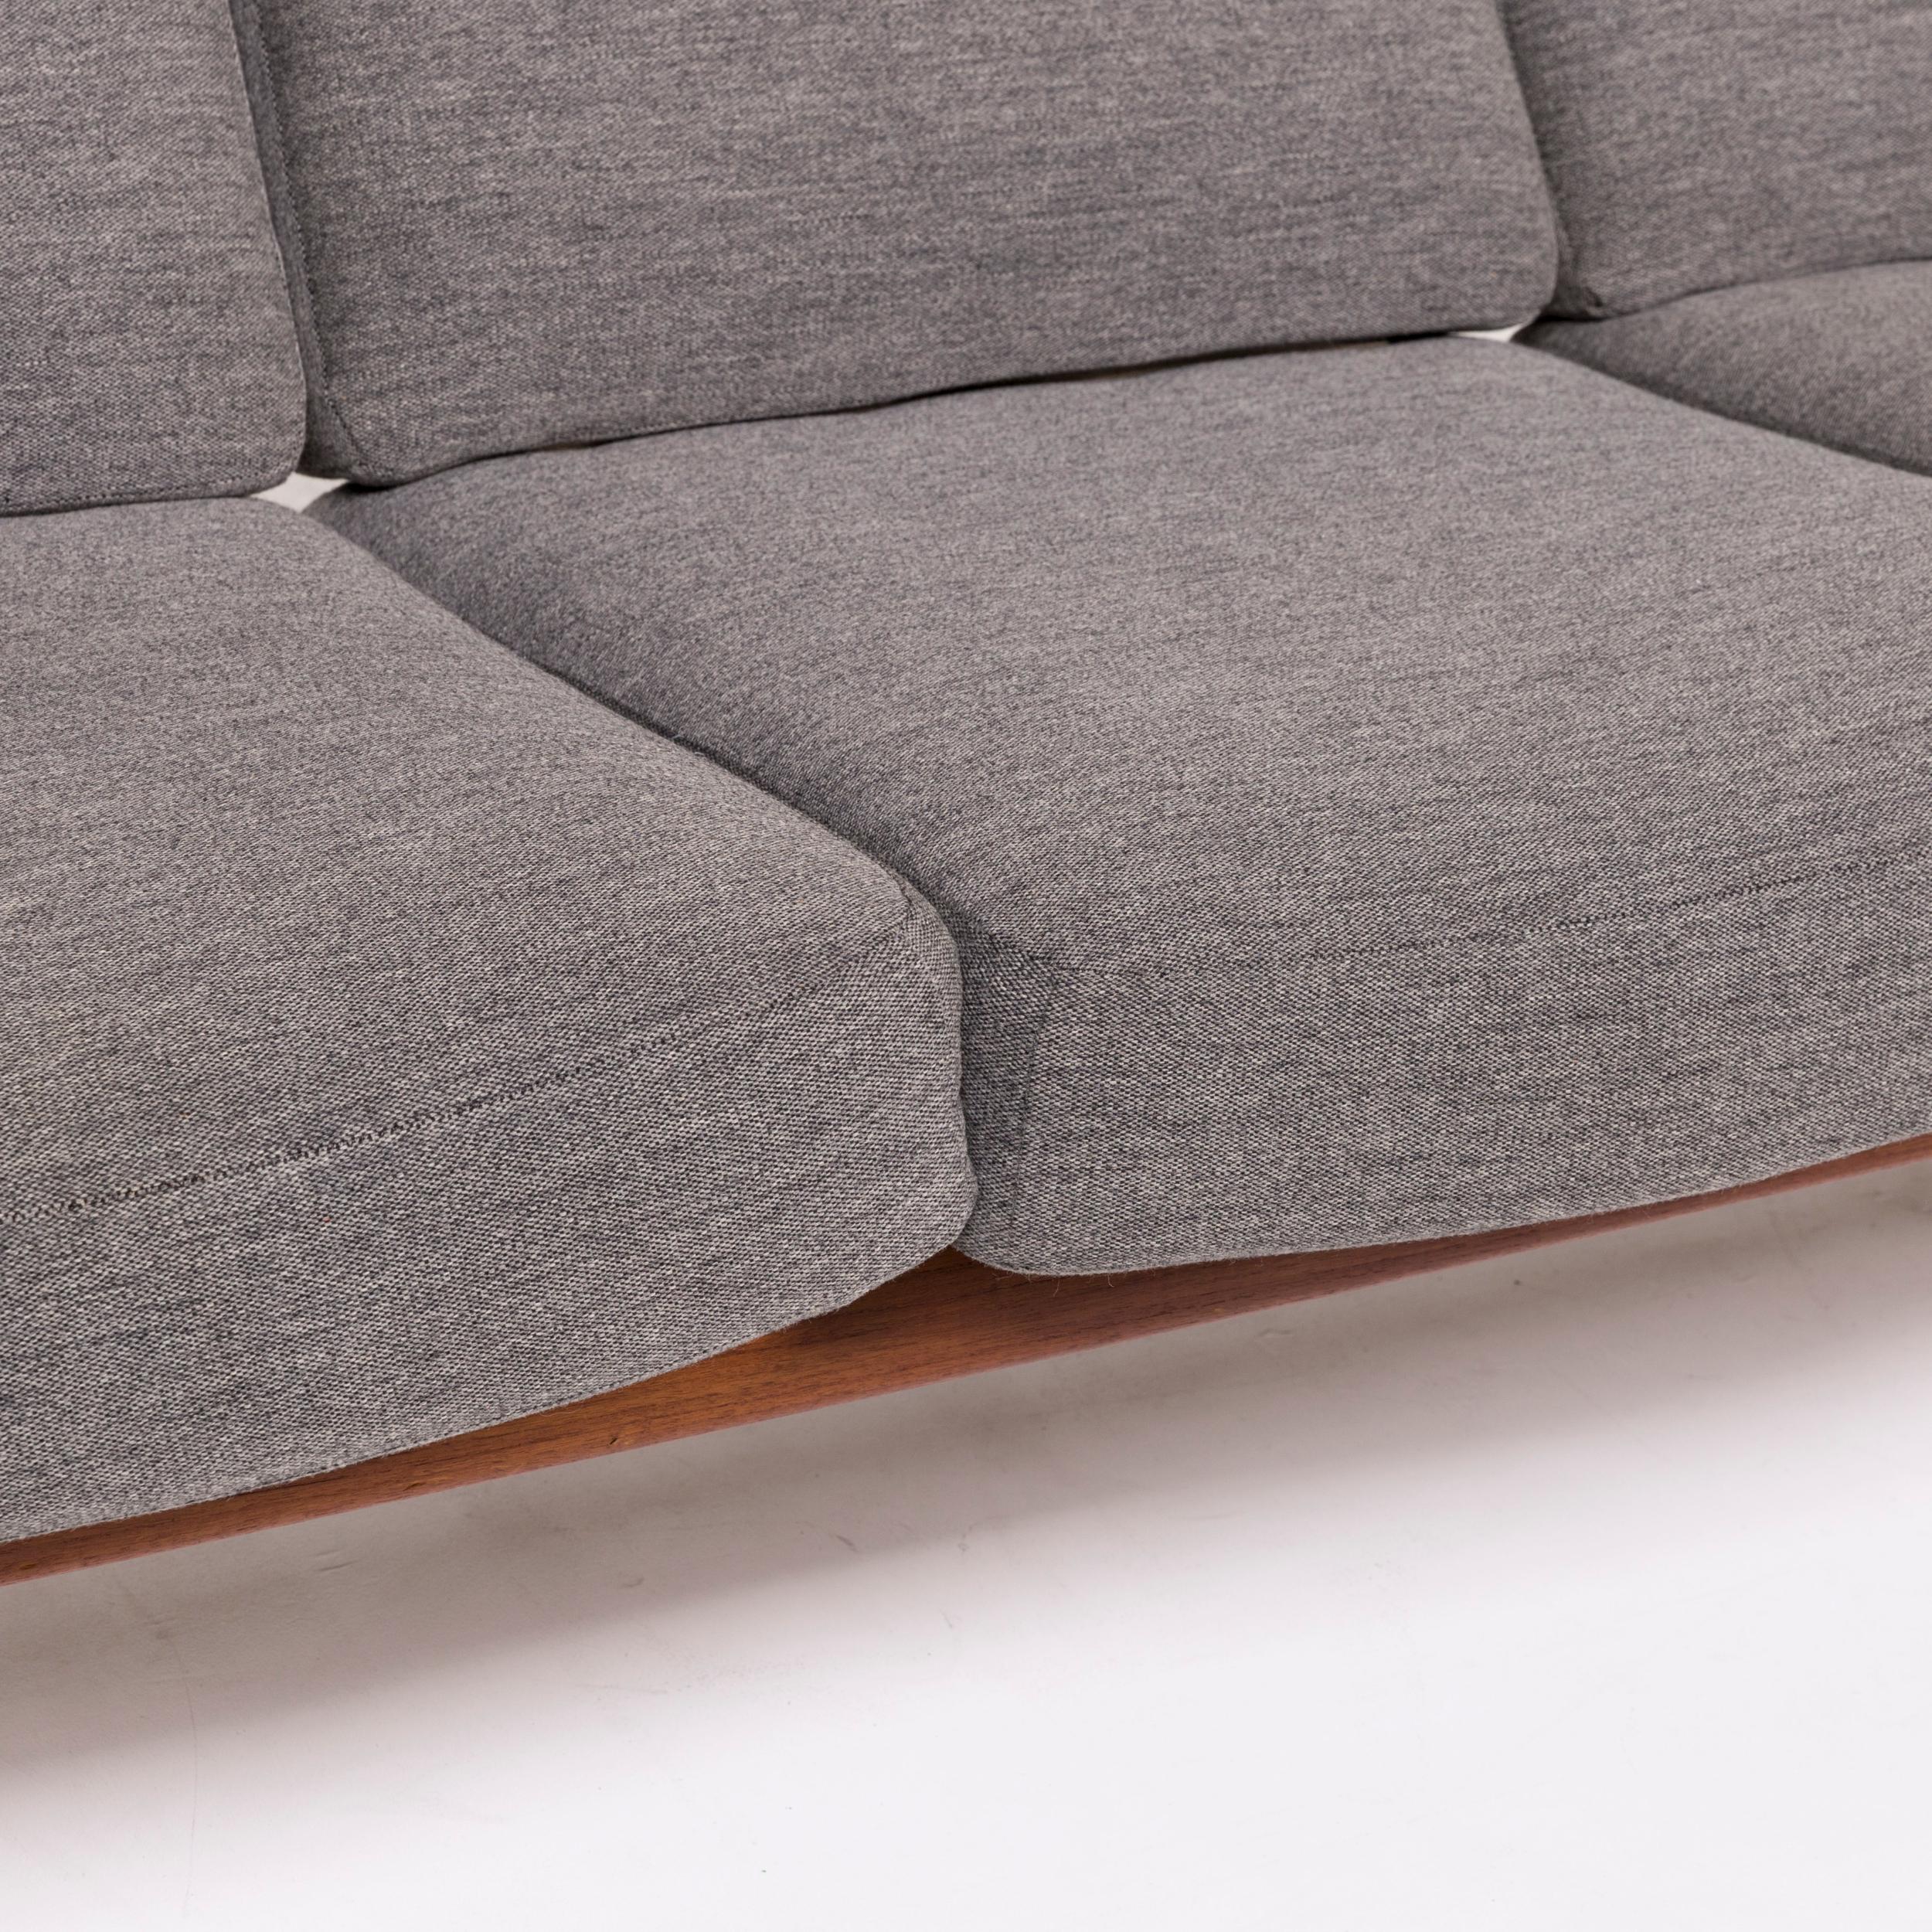 We bring to you a Walter Knoll fabric sofa gray three-seat couch.

 

 Product Measurements in centimeters:
 

Depth 75
Width 175
Height 72
Seat-height 41
Rest-height 55
Seat-depth 52
Seat-width 163
Back-height 31.